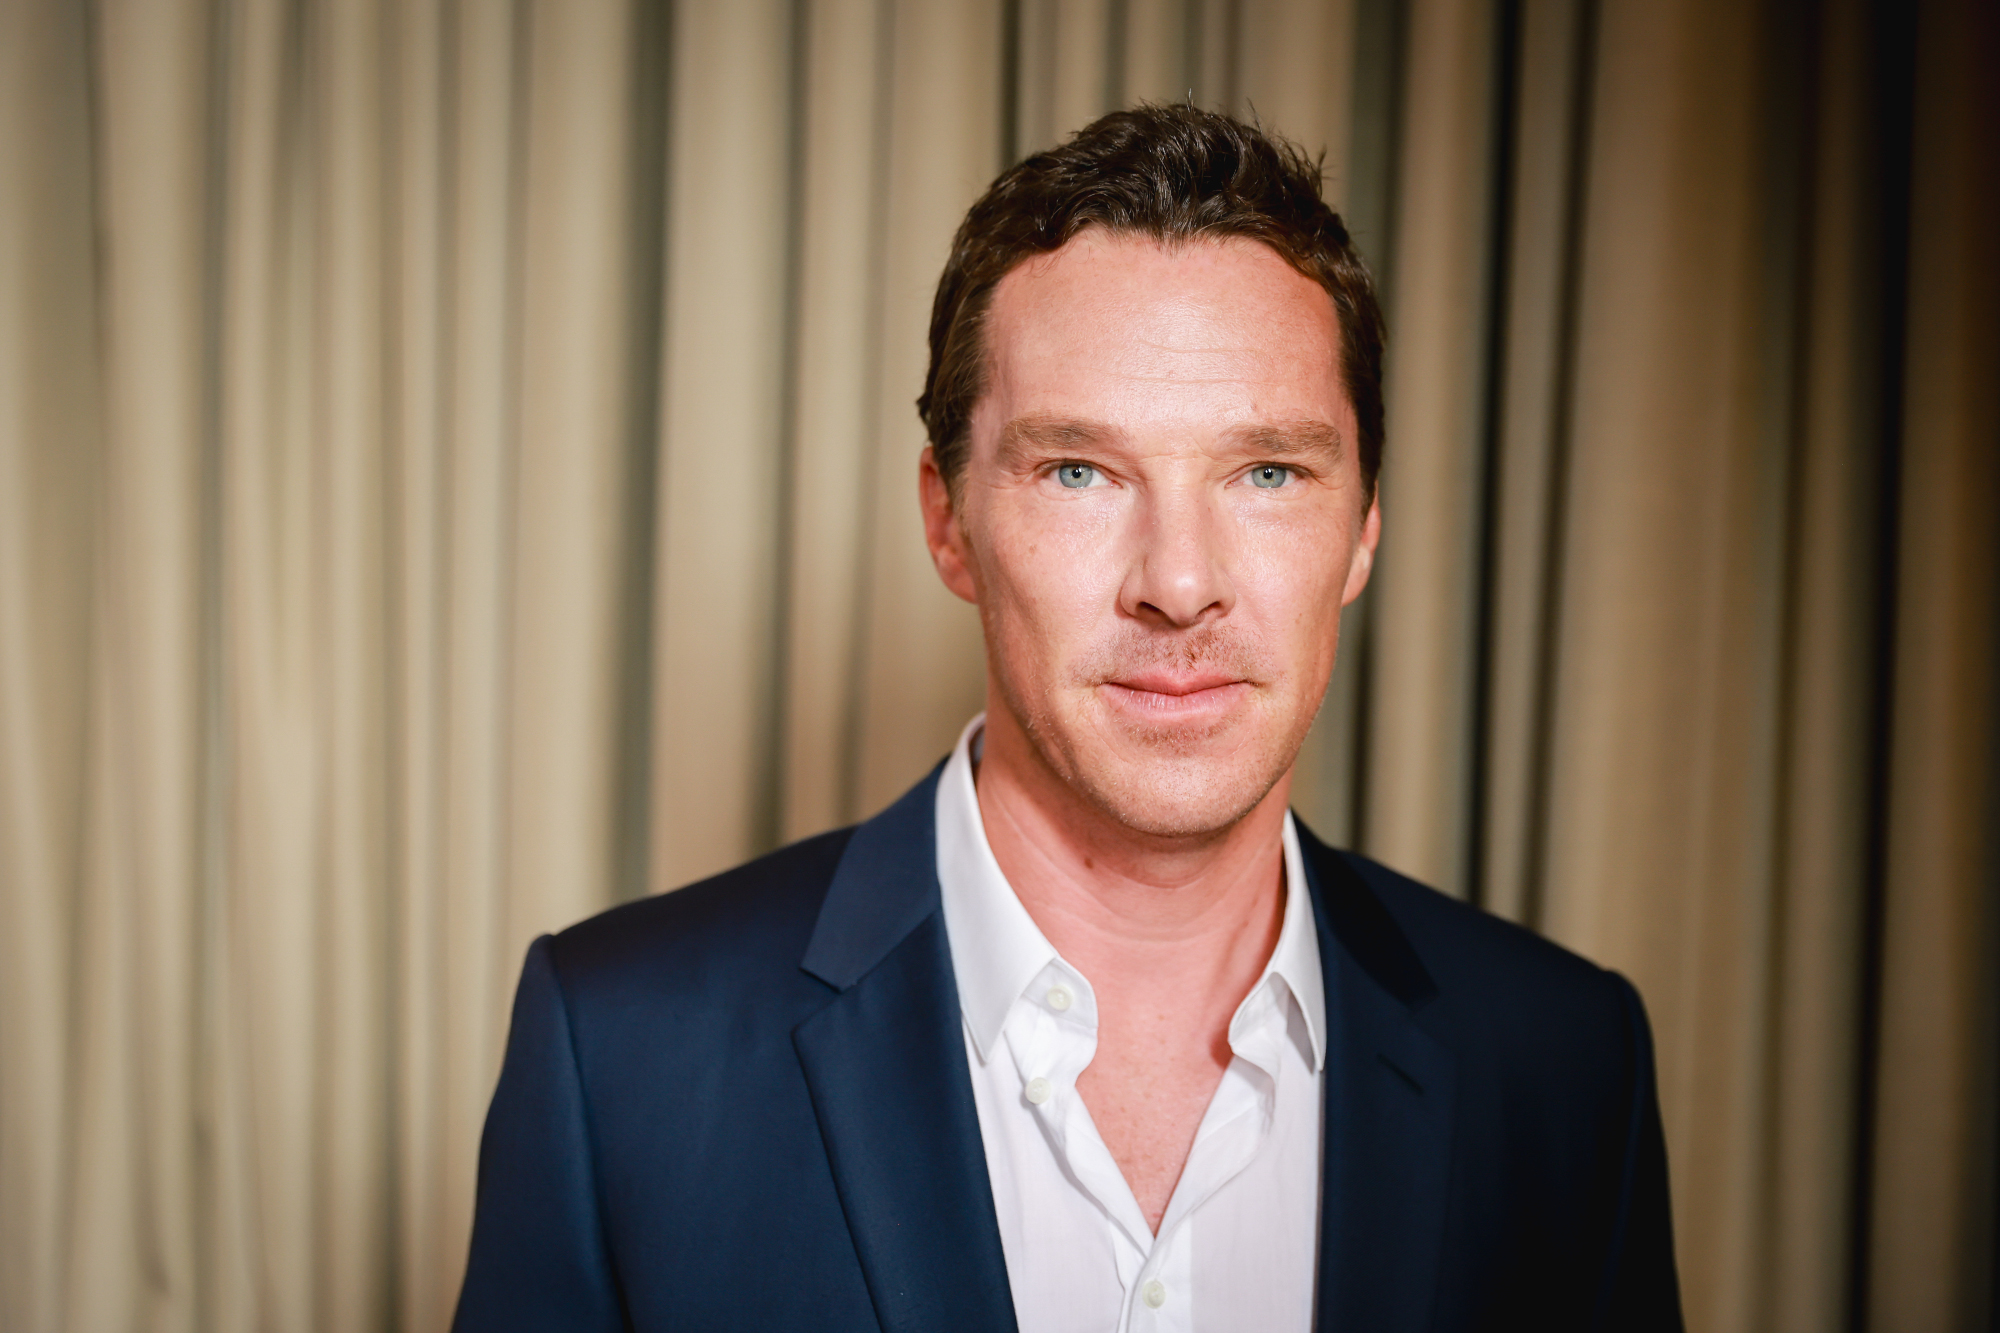 Benedict Cumberbatch Is Working to Place Ukrainian Families, Even in His Home